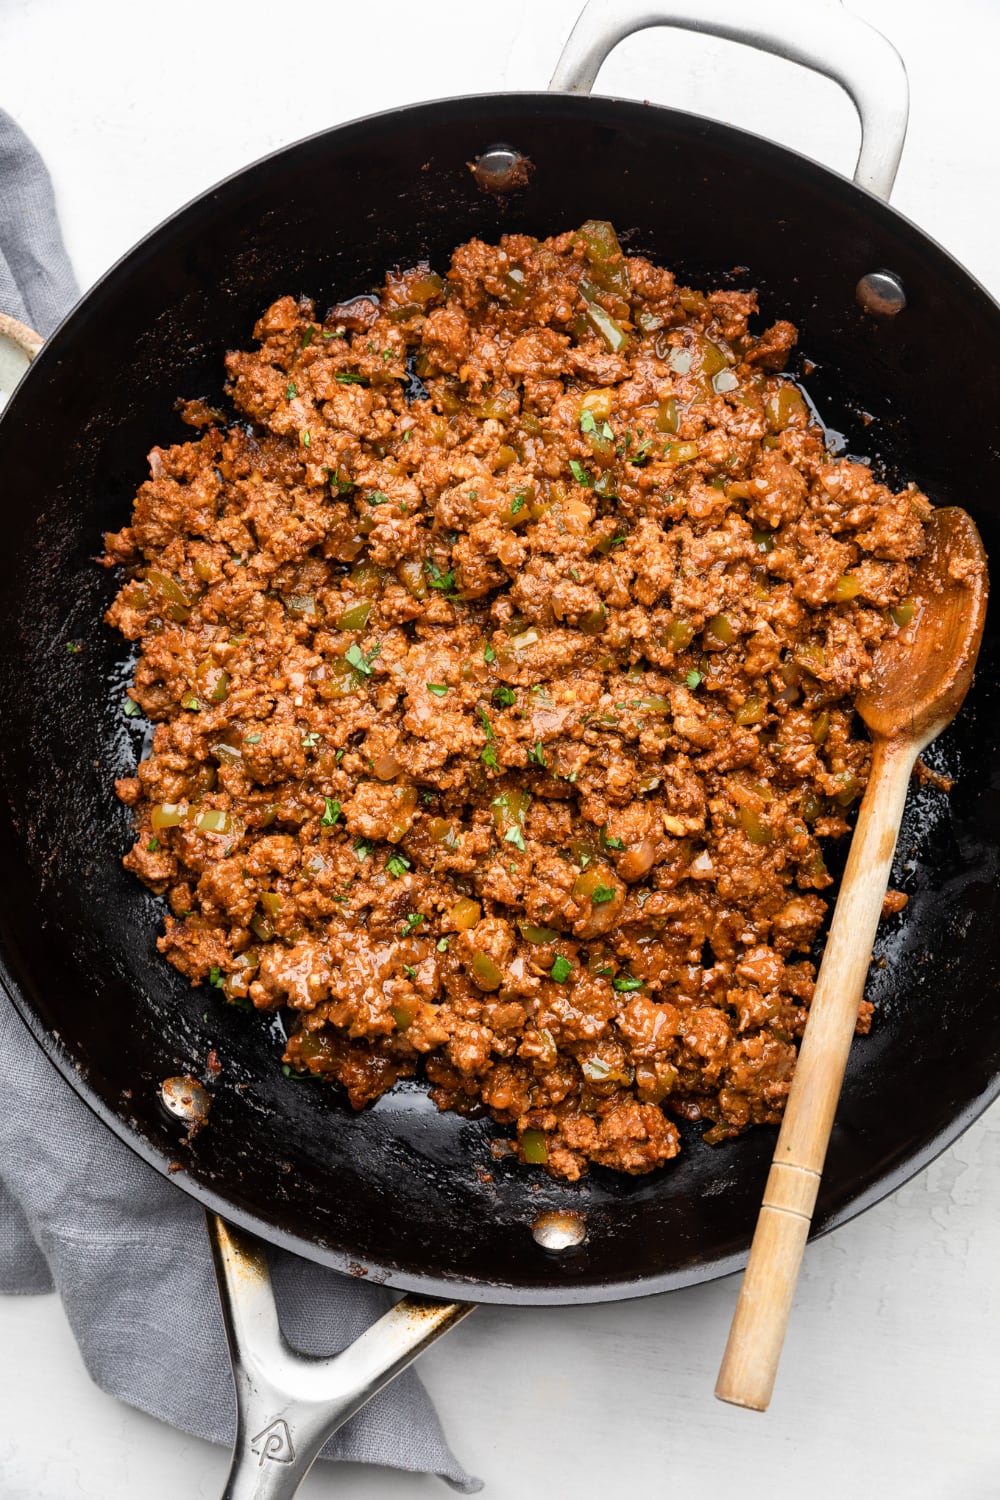 Finished healthy sloppy joes in the pan after being simmered